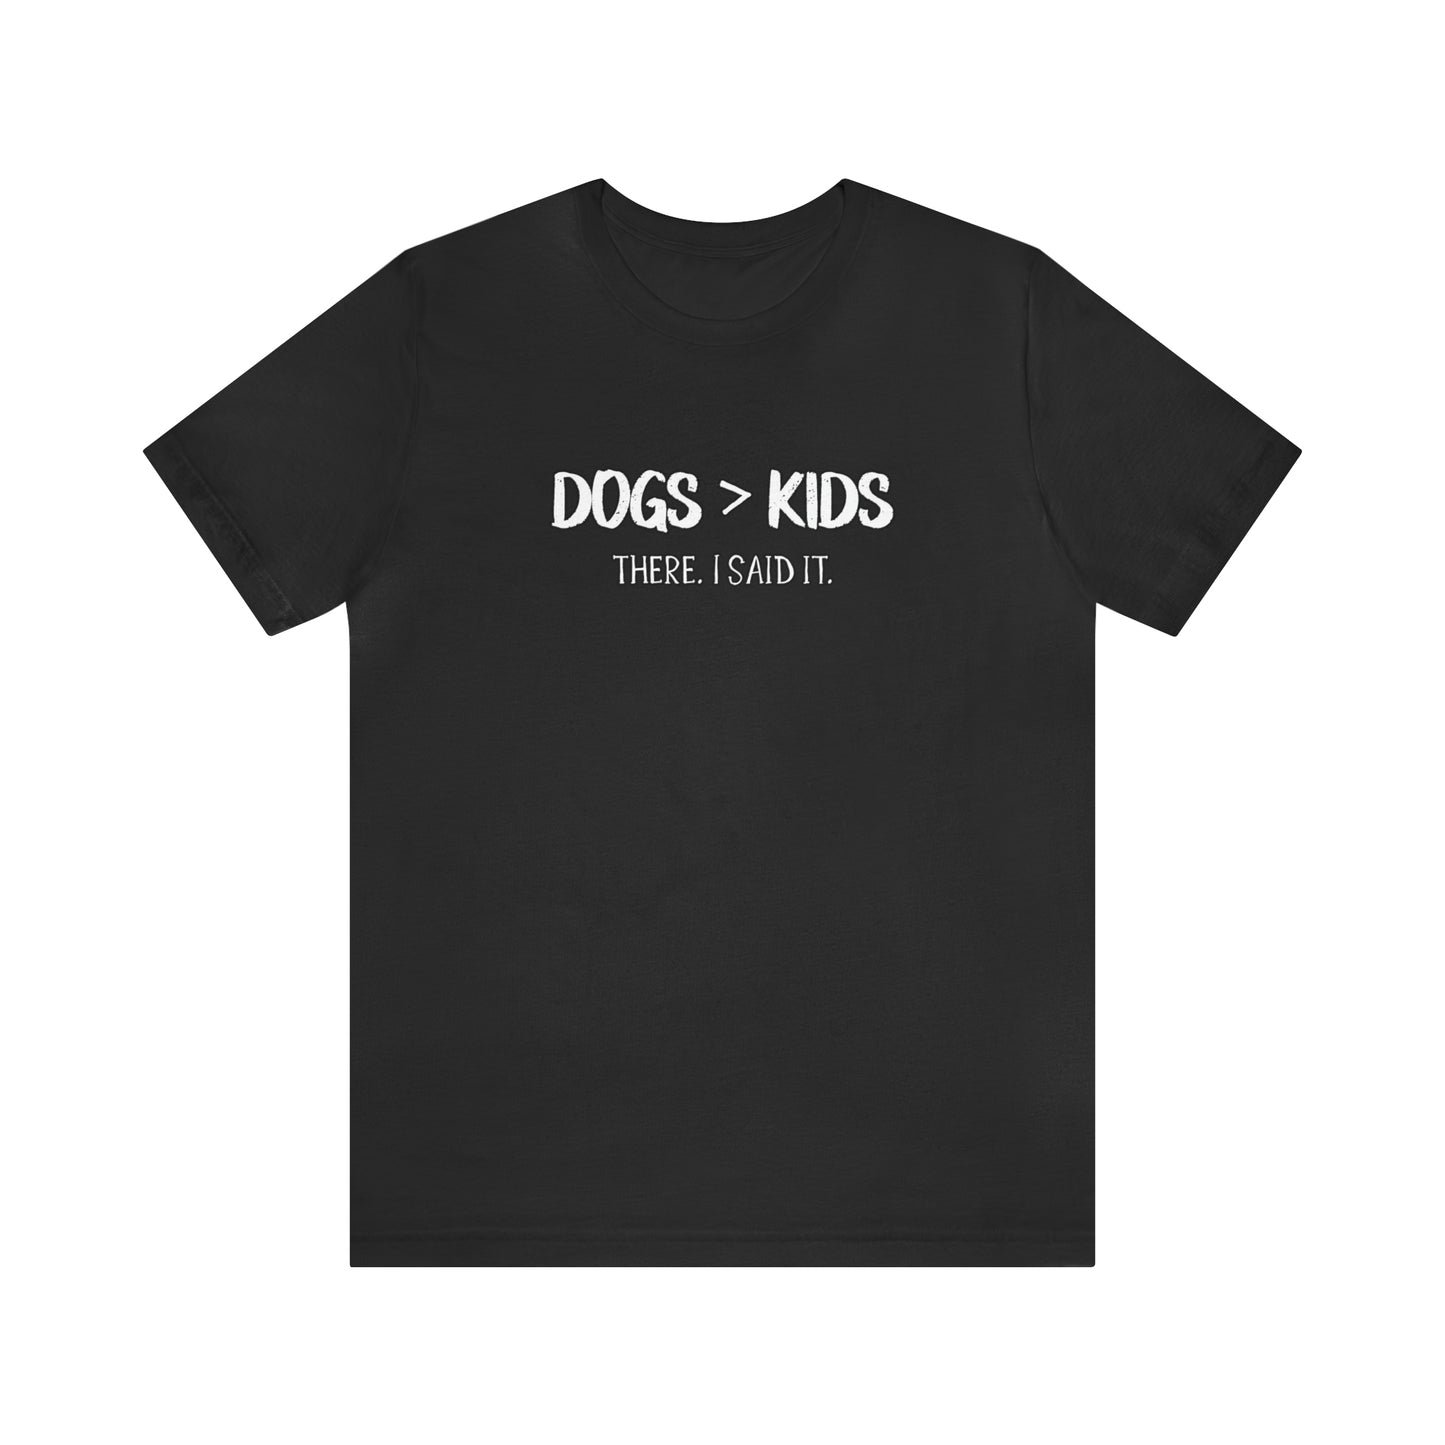 dogs are better than kids t shirt